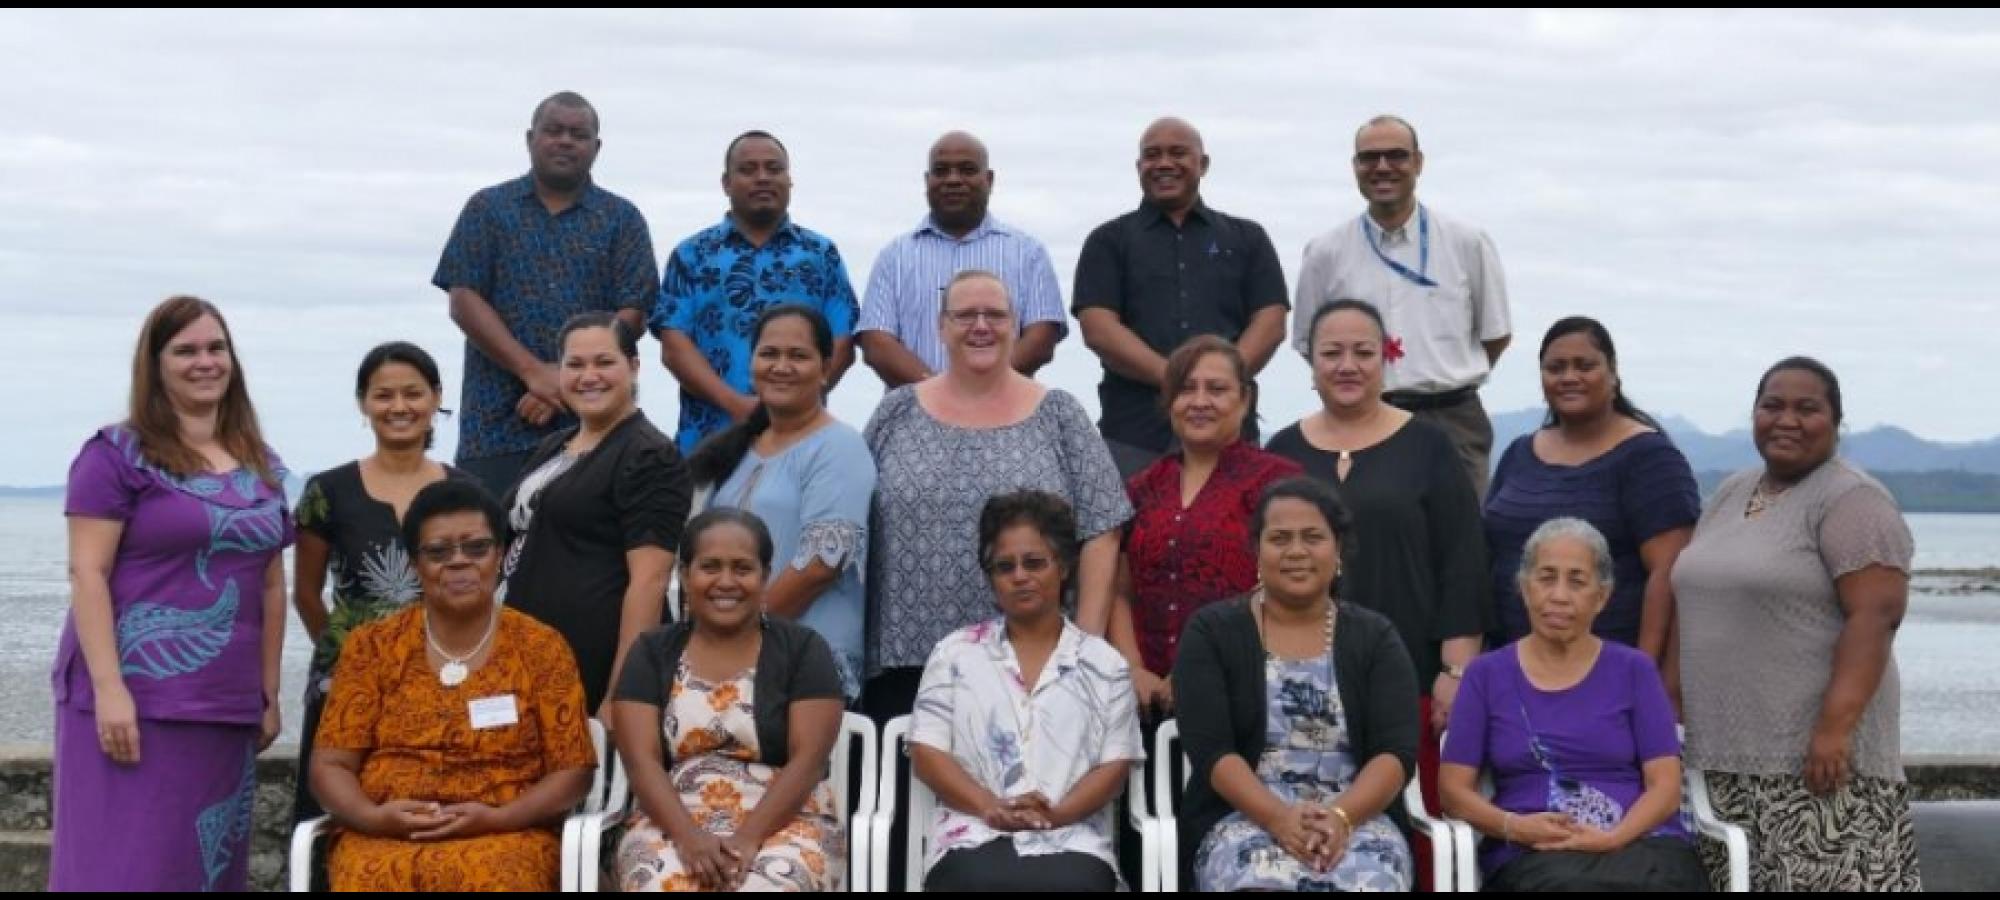 Pacific children key to championing human rights in the region